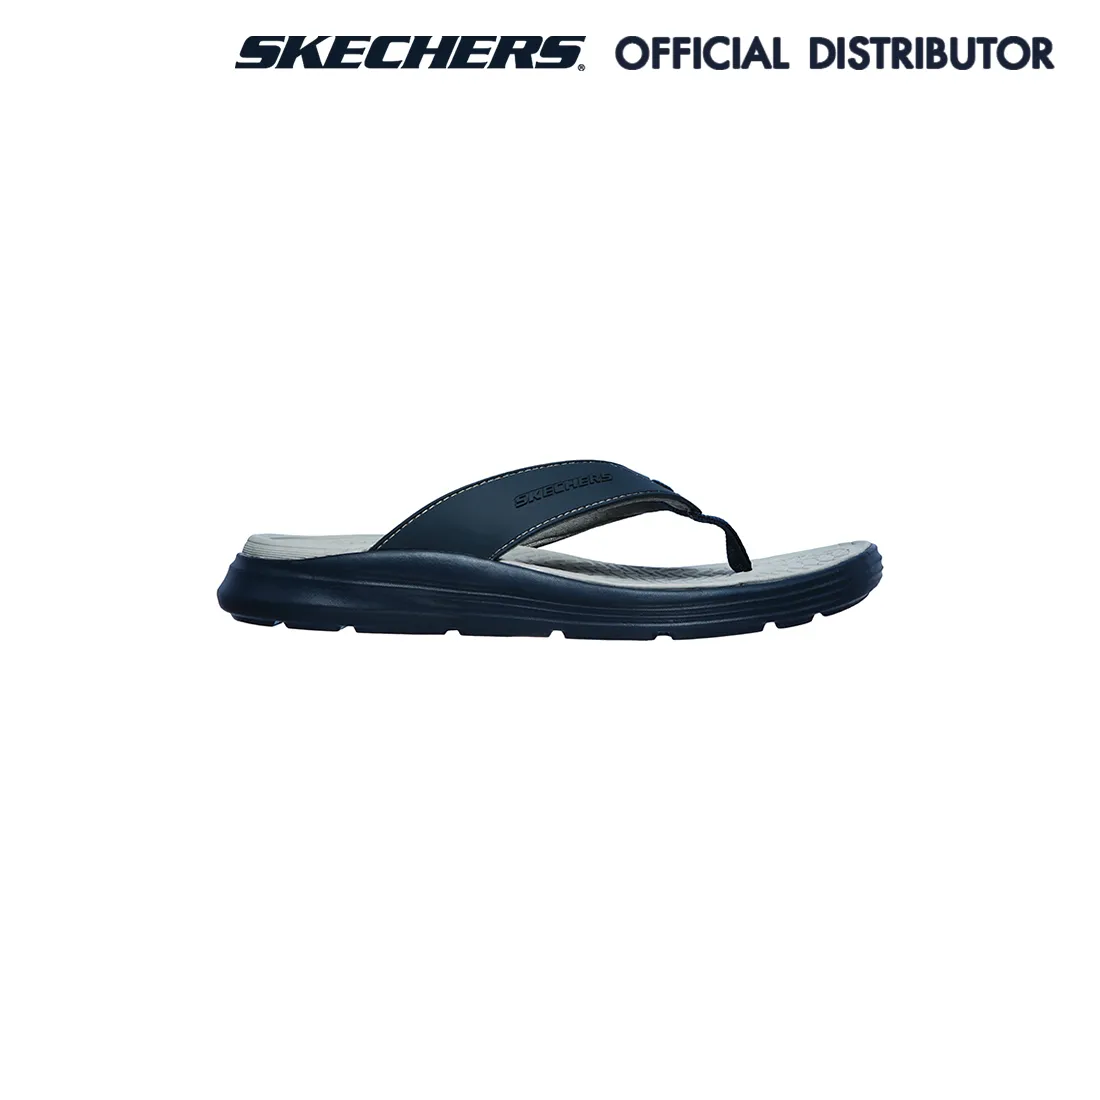 SKECHERS Relaxed Fit: Sargo - Sunview รองเท้าแตะผู้ชาย